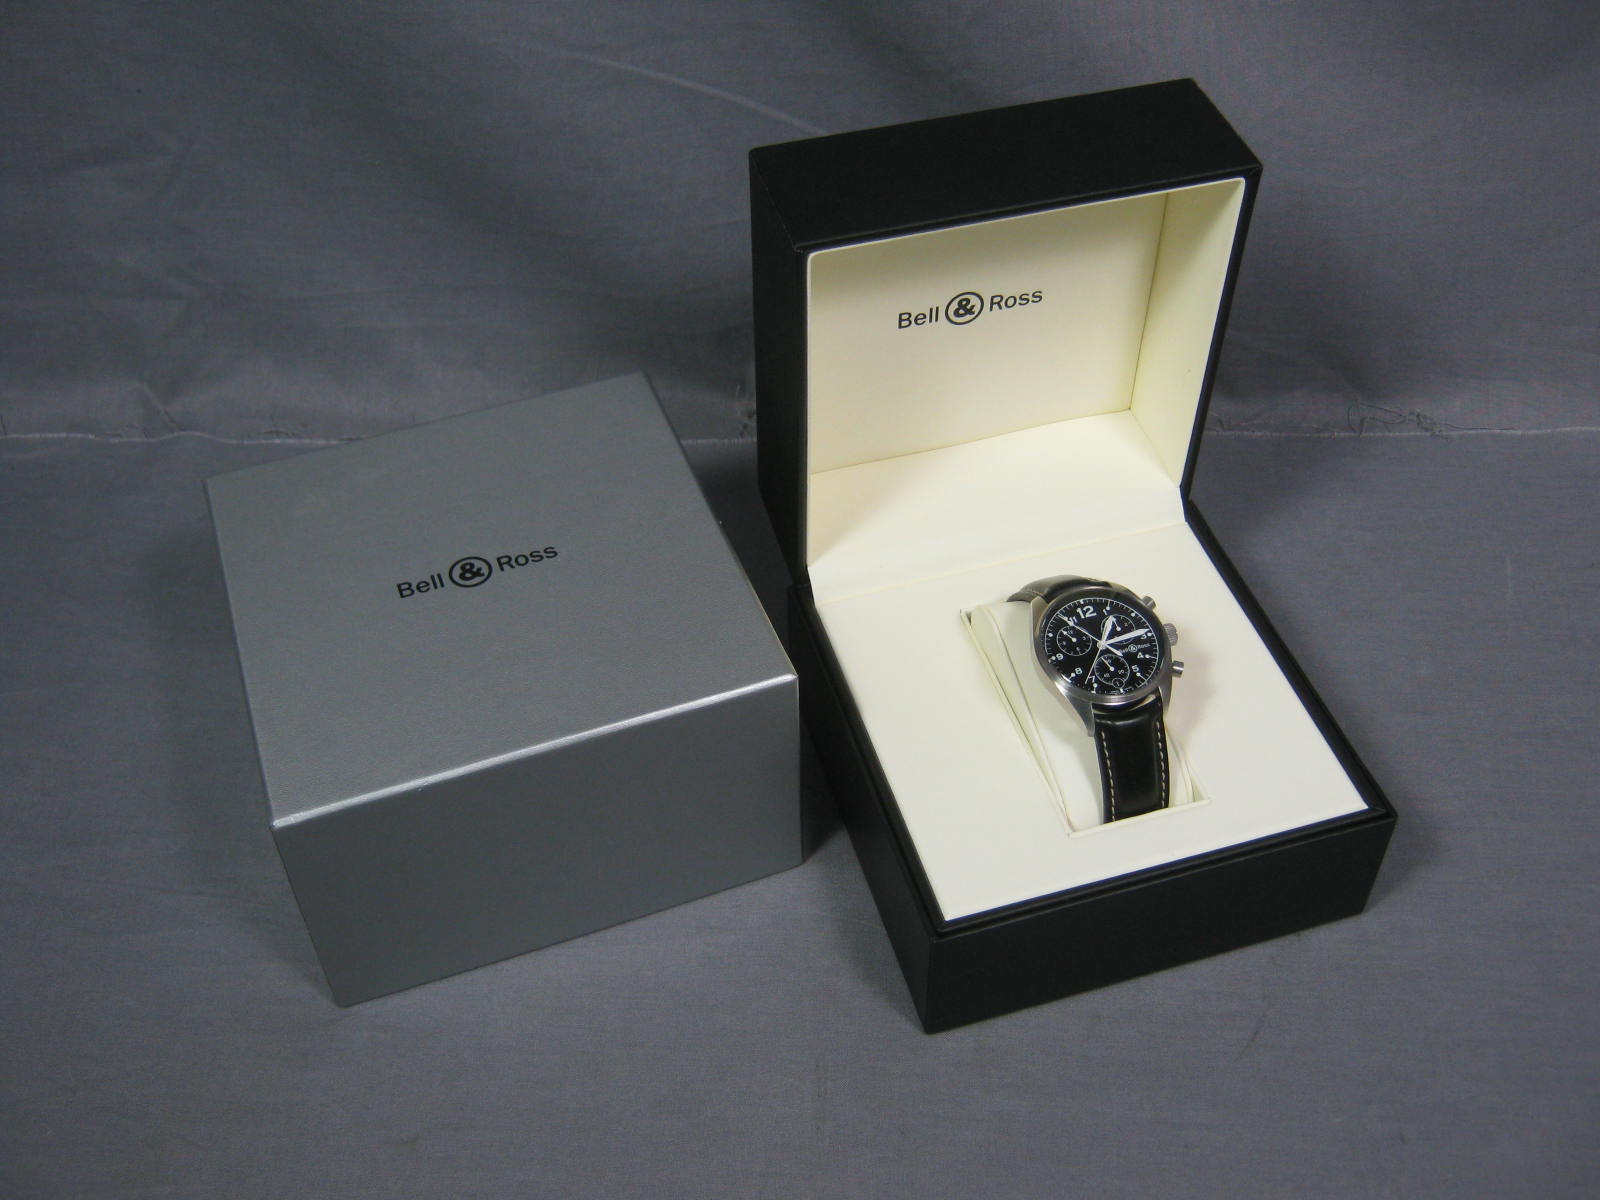 Bell & Ross Chronograph Watch Vintage Model 120 W/ Box